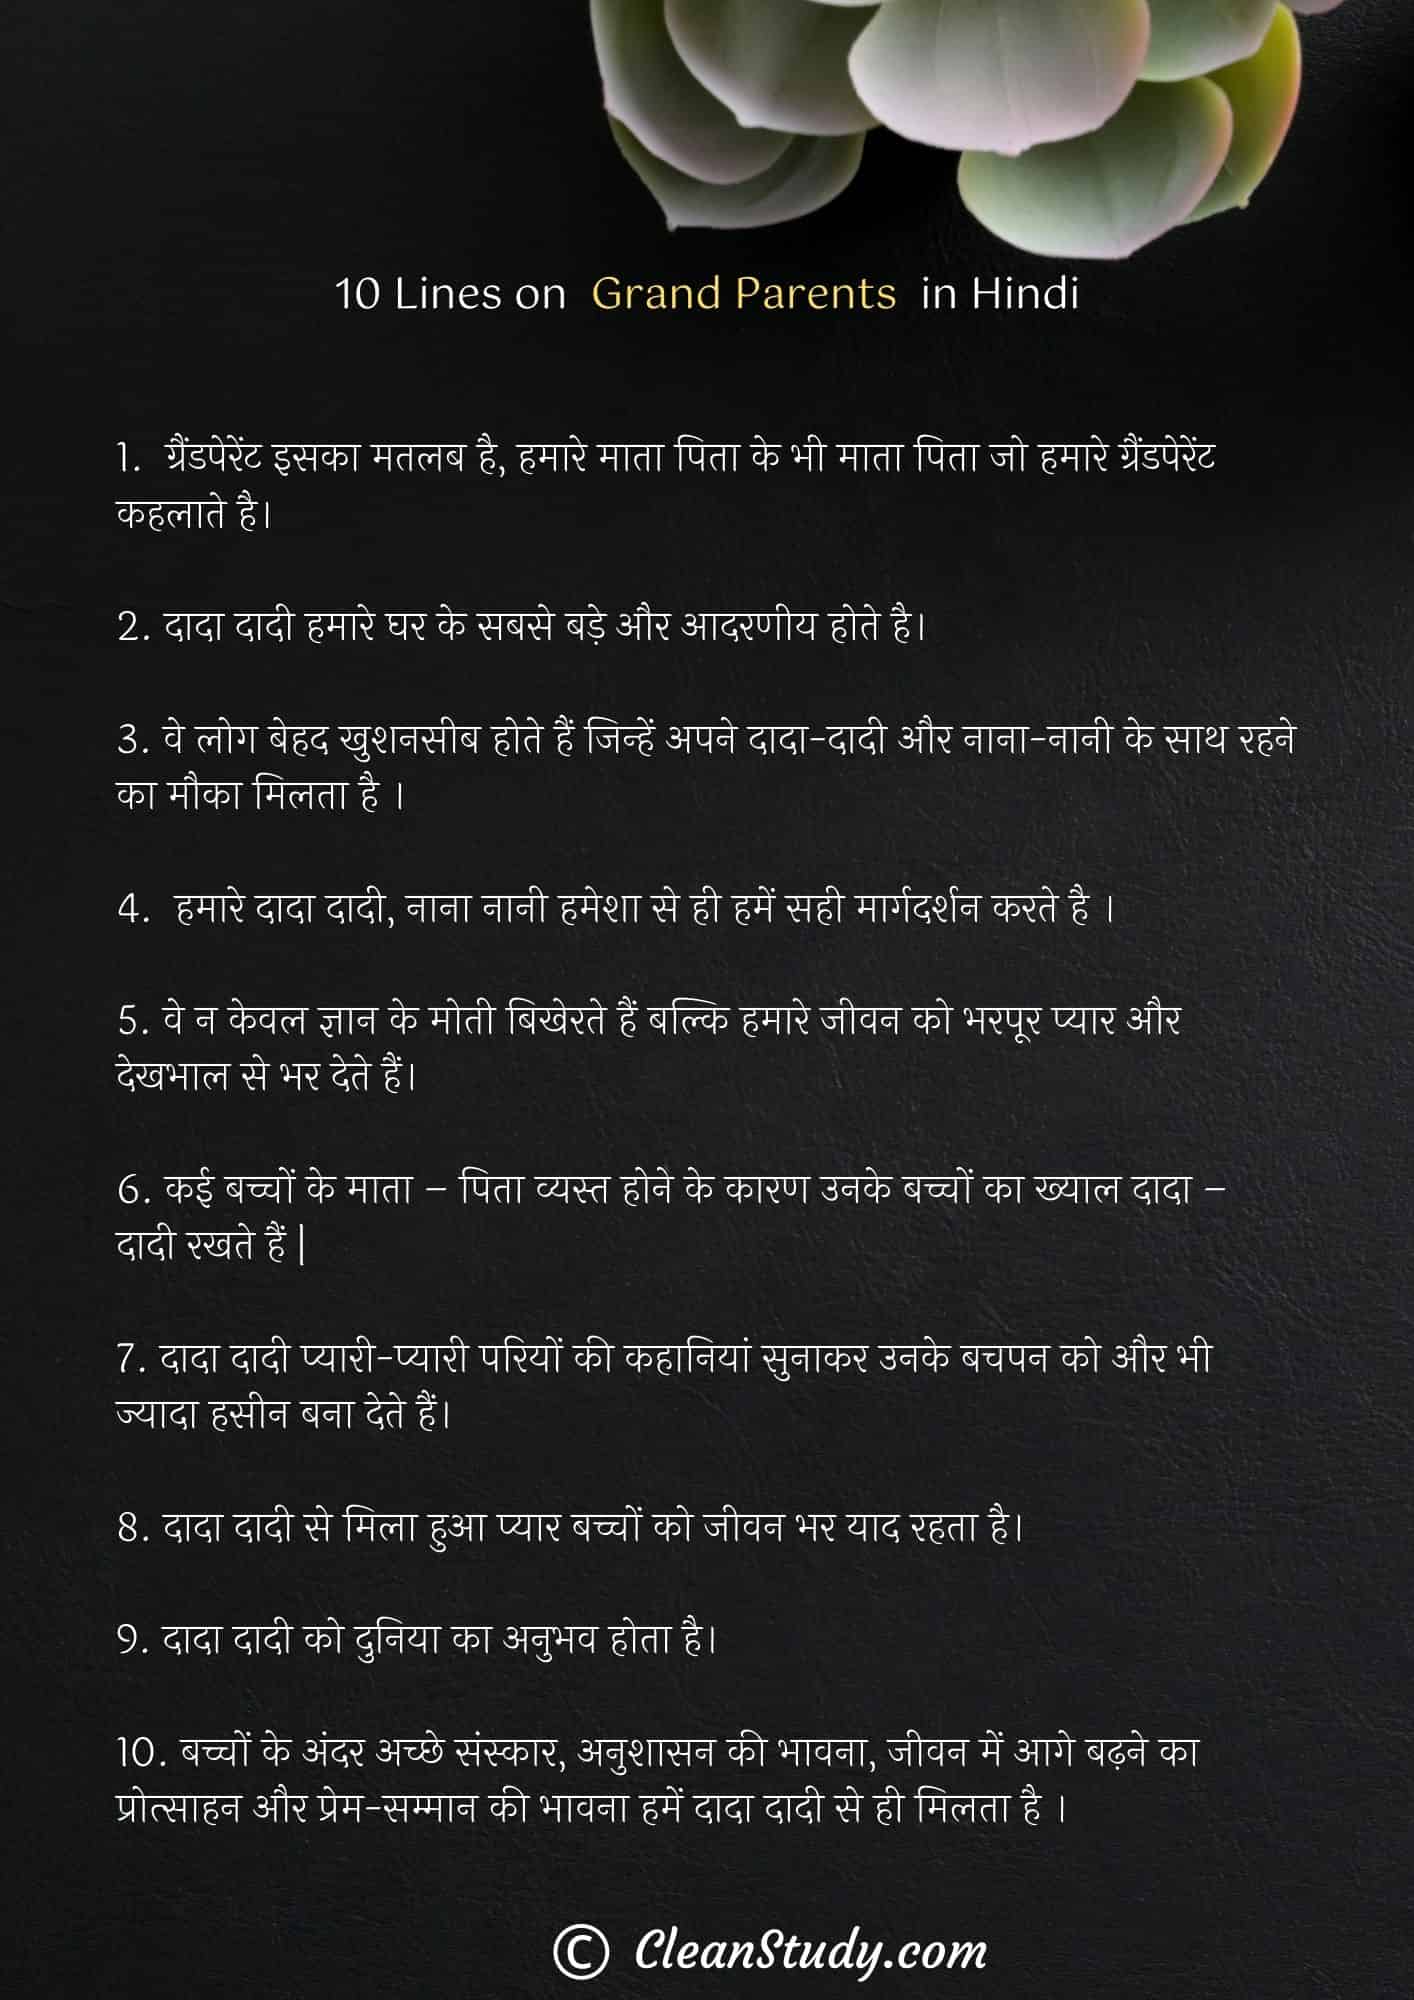 10 Lines on Grand Parents in Hindi